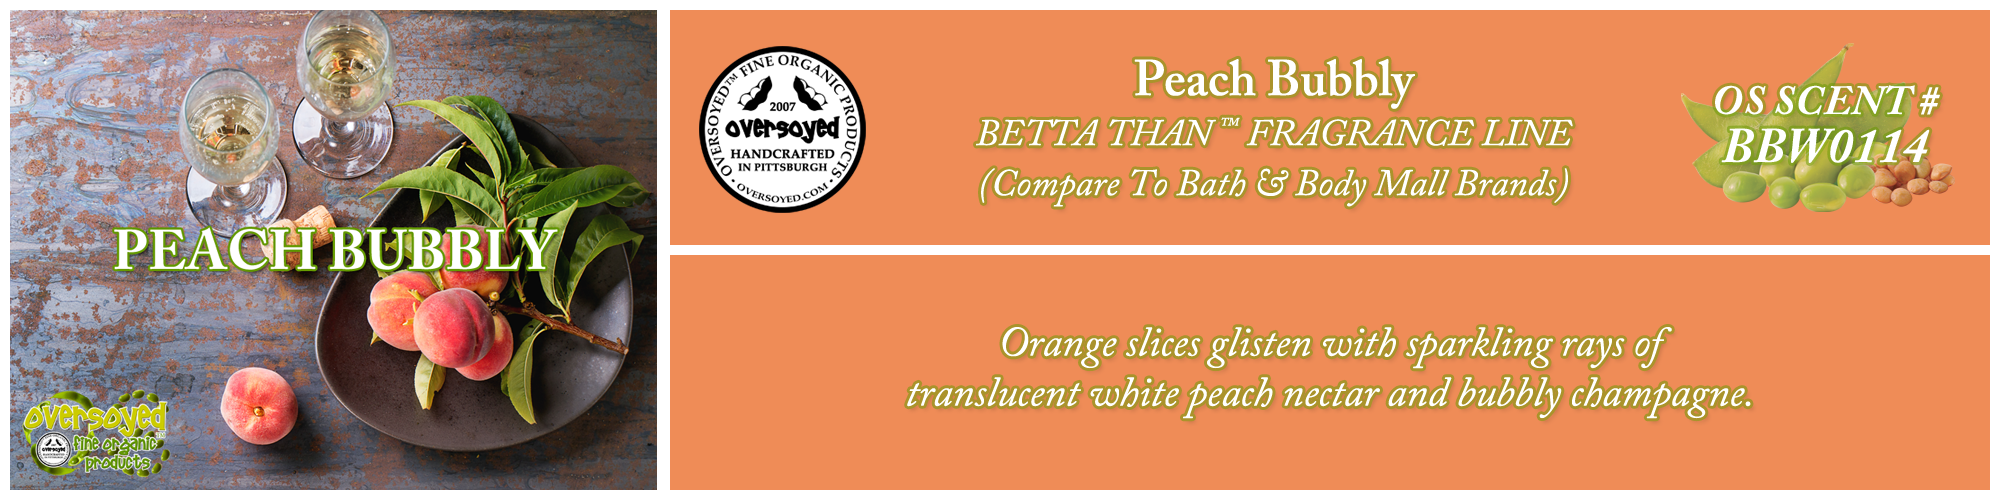 Peach Bubbly Handcrafted Products Collection